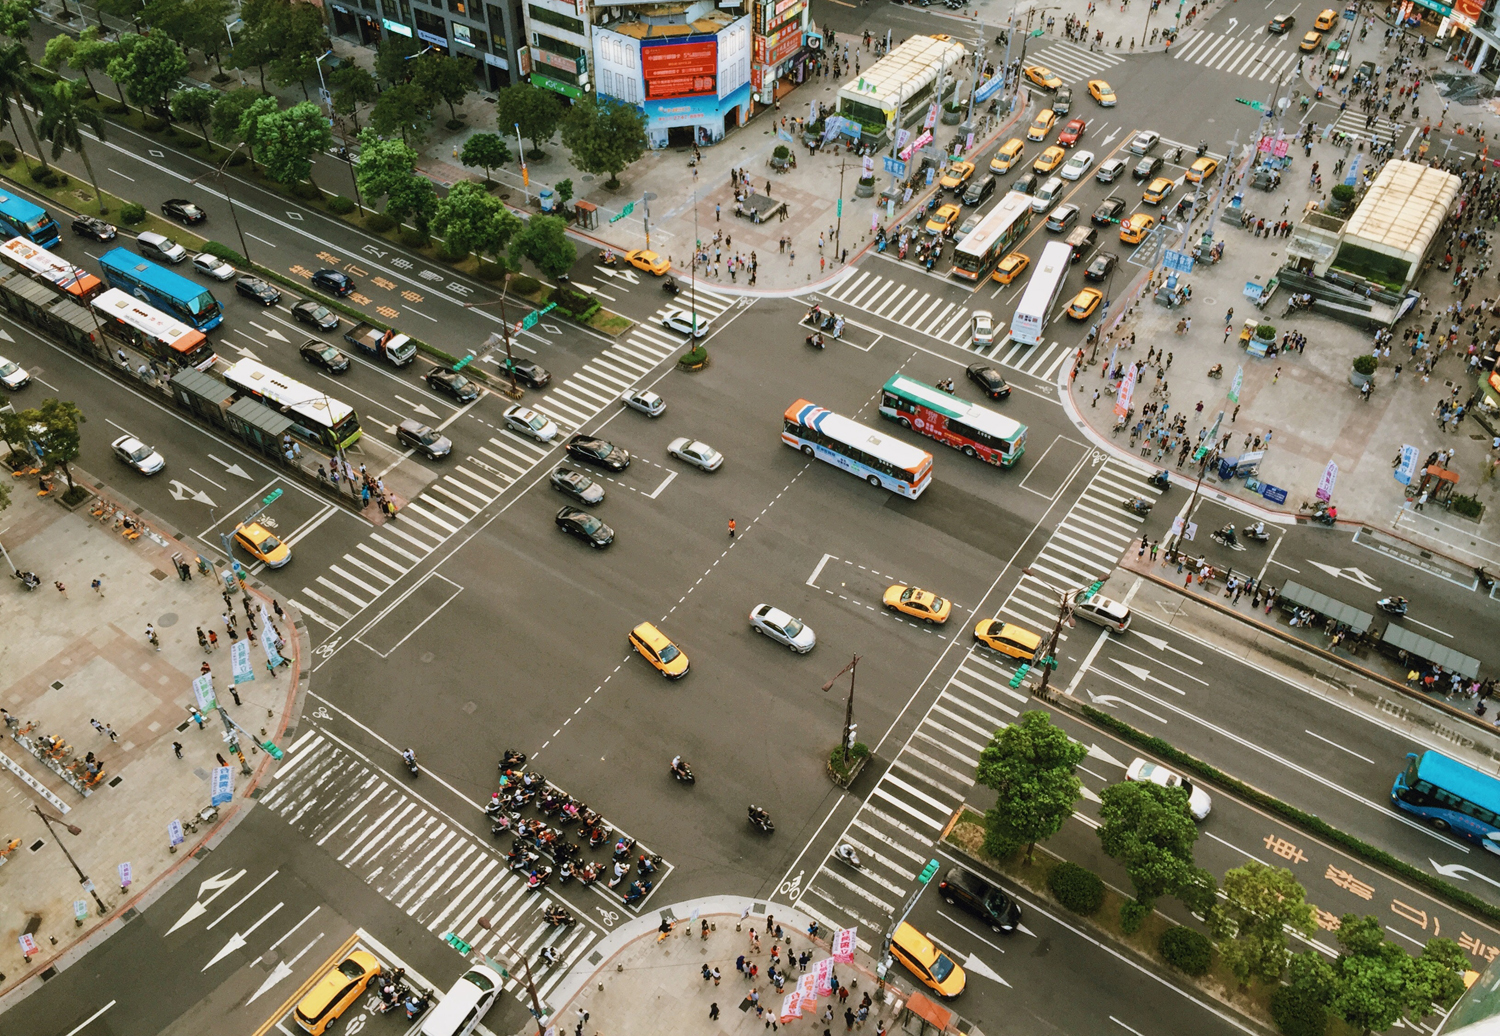 Urban transport networks in megacities ‘at breaking point’ - Transport